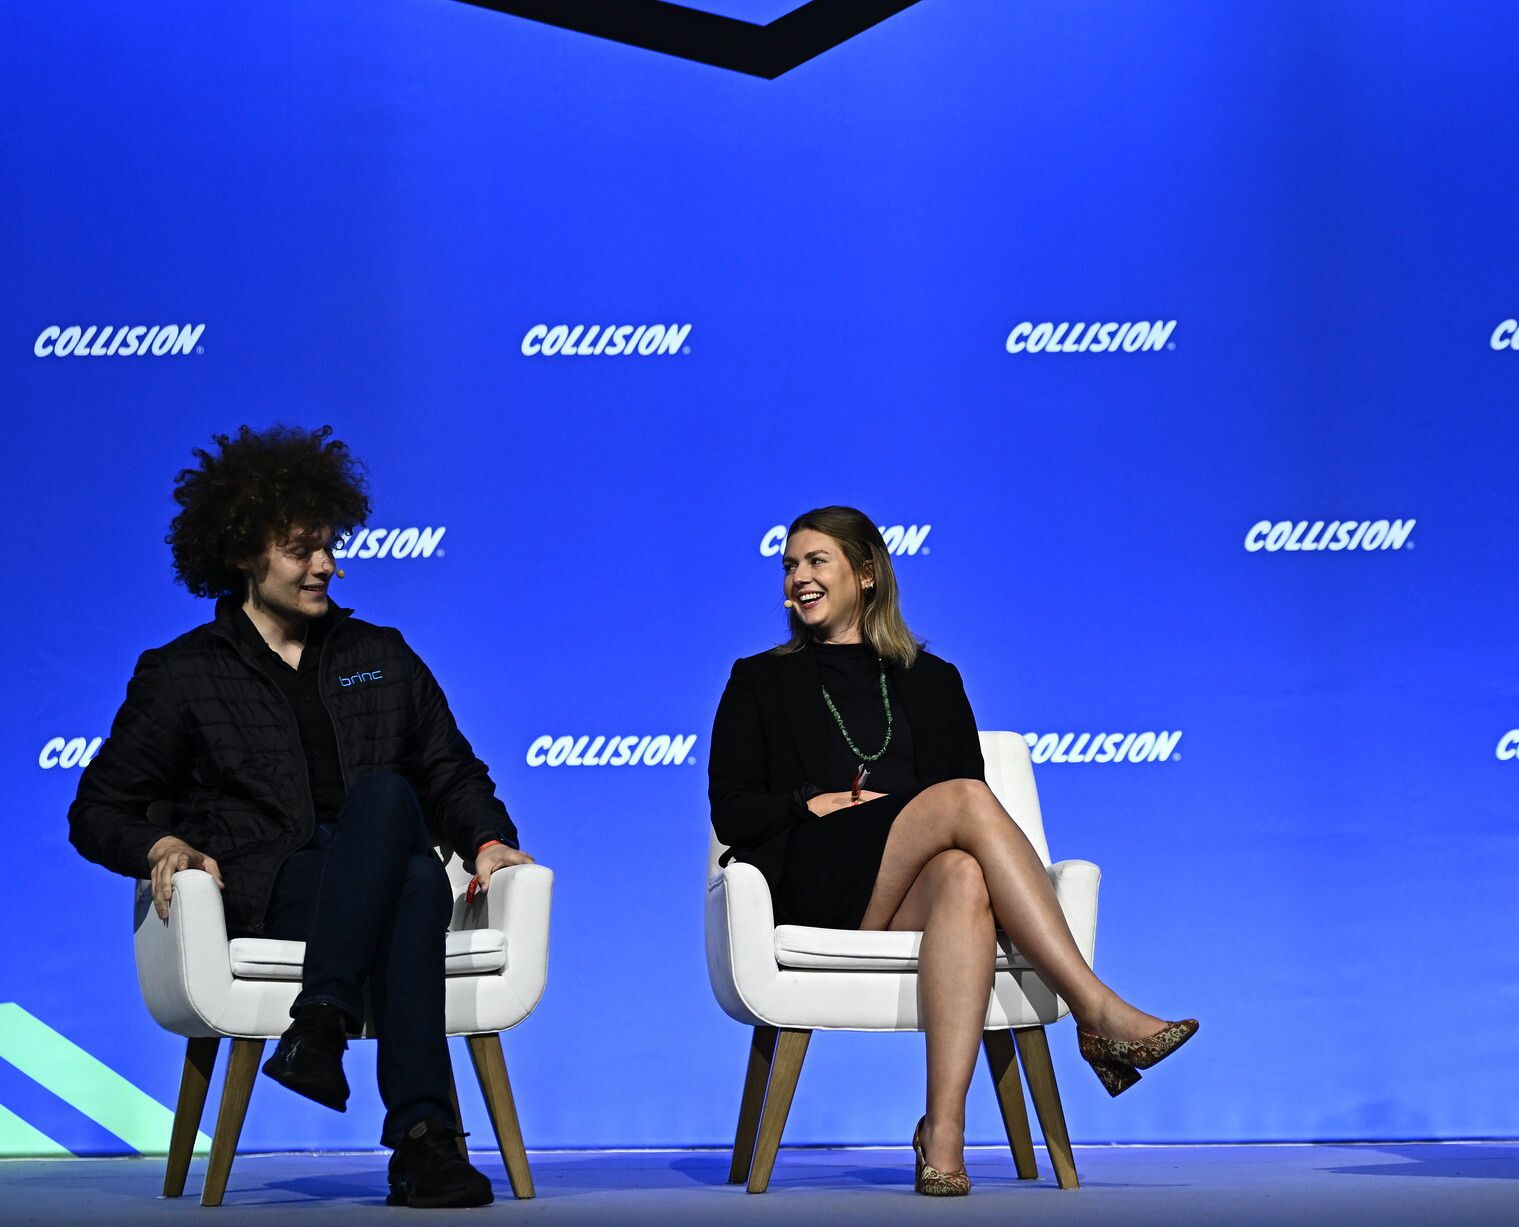 Blake Resnick of BRINC Drones (left) and Erin Price-Wright of Index Ventures (right)